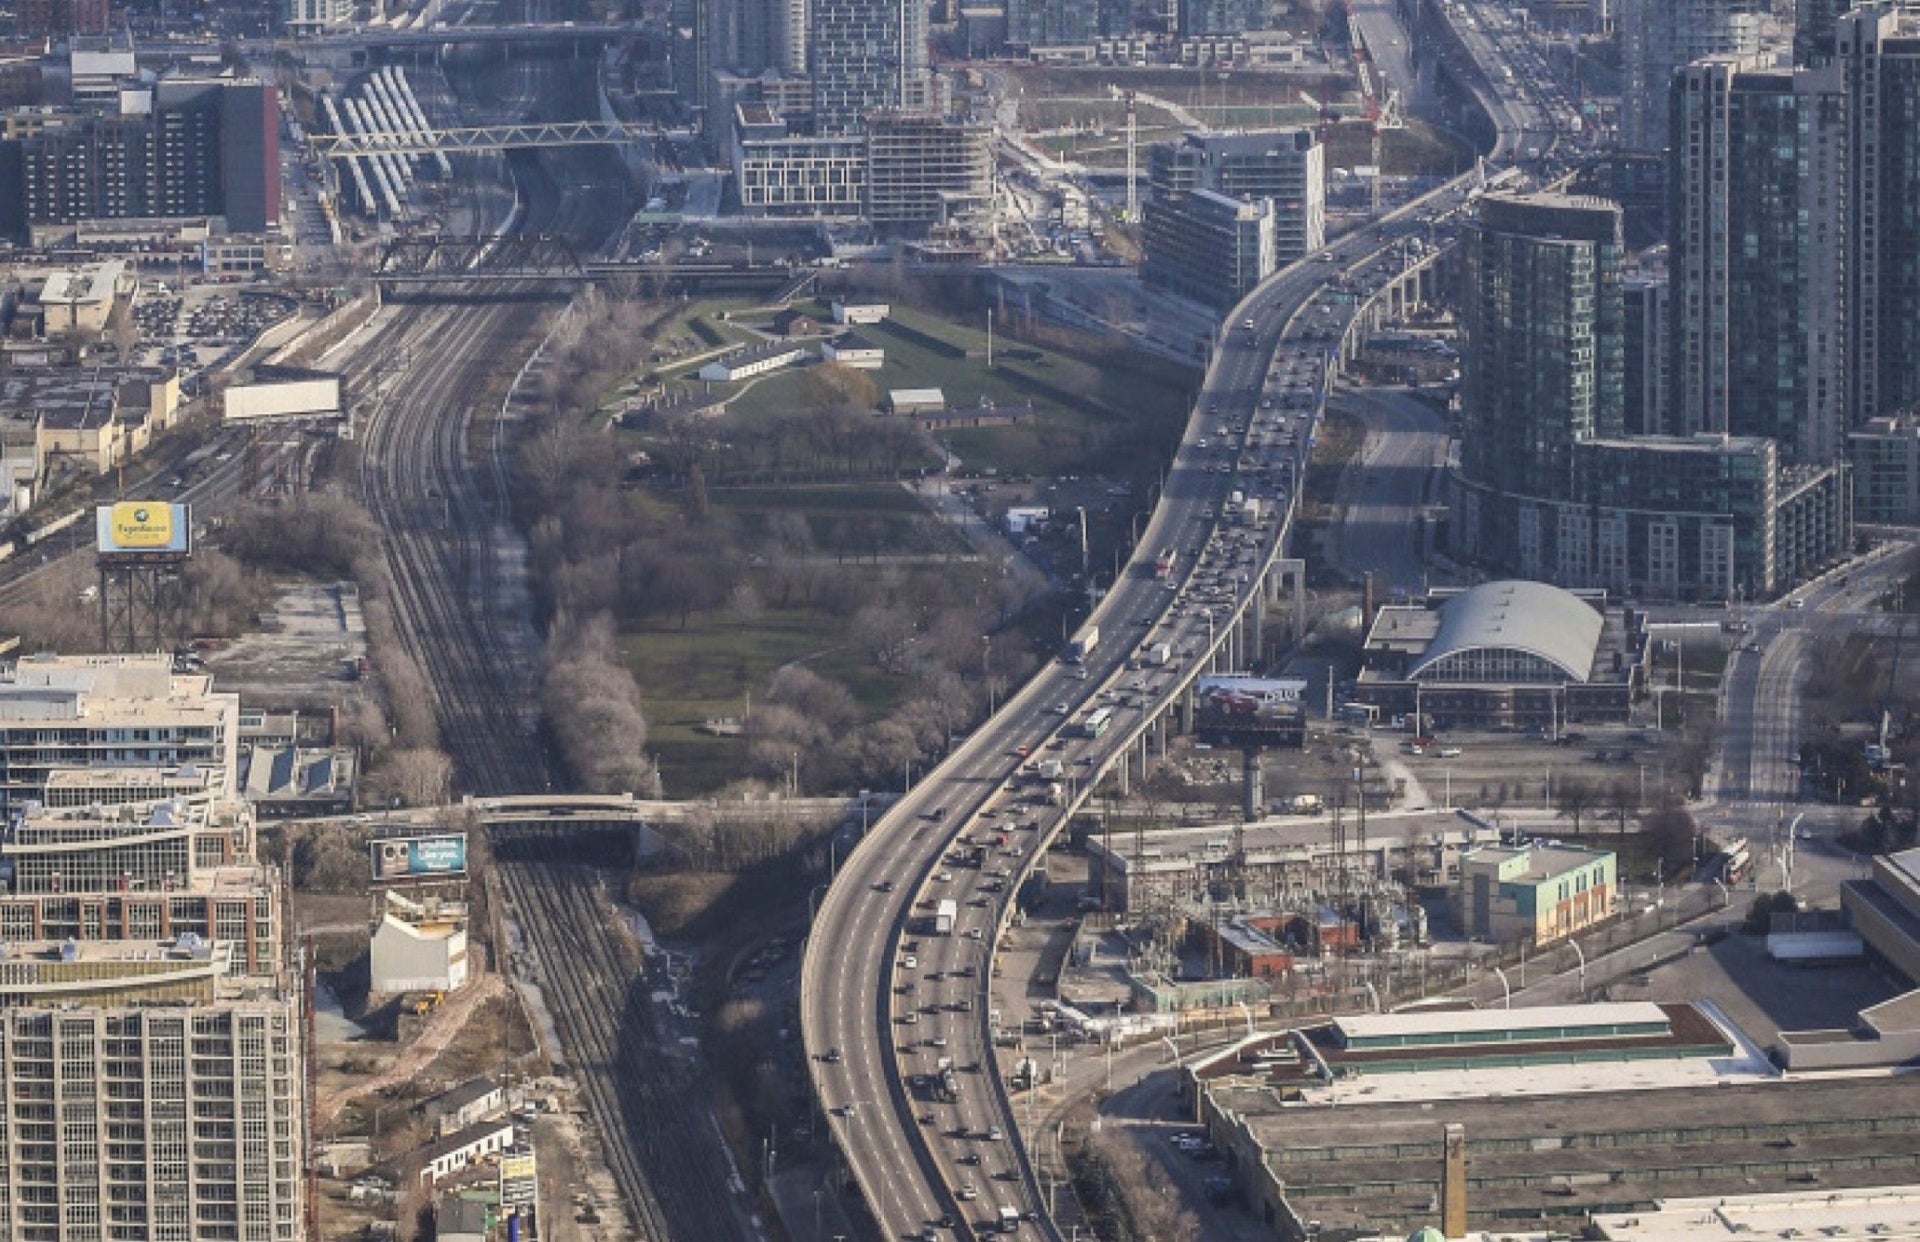 The Gardiner Expressway weaves through some of the most dense and fast-growing neighbouhoods in Toronto’s downtown.